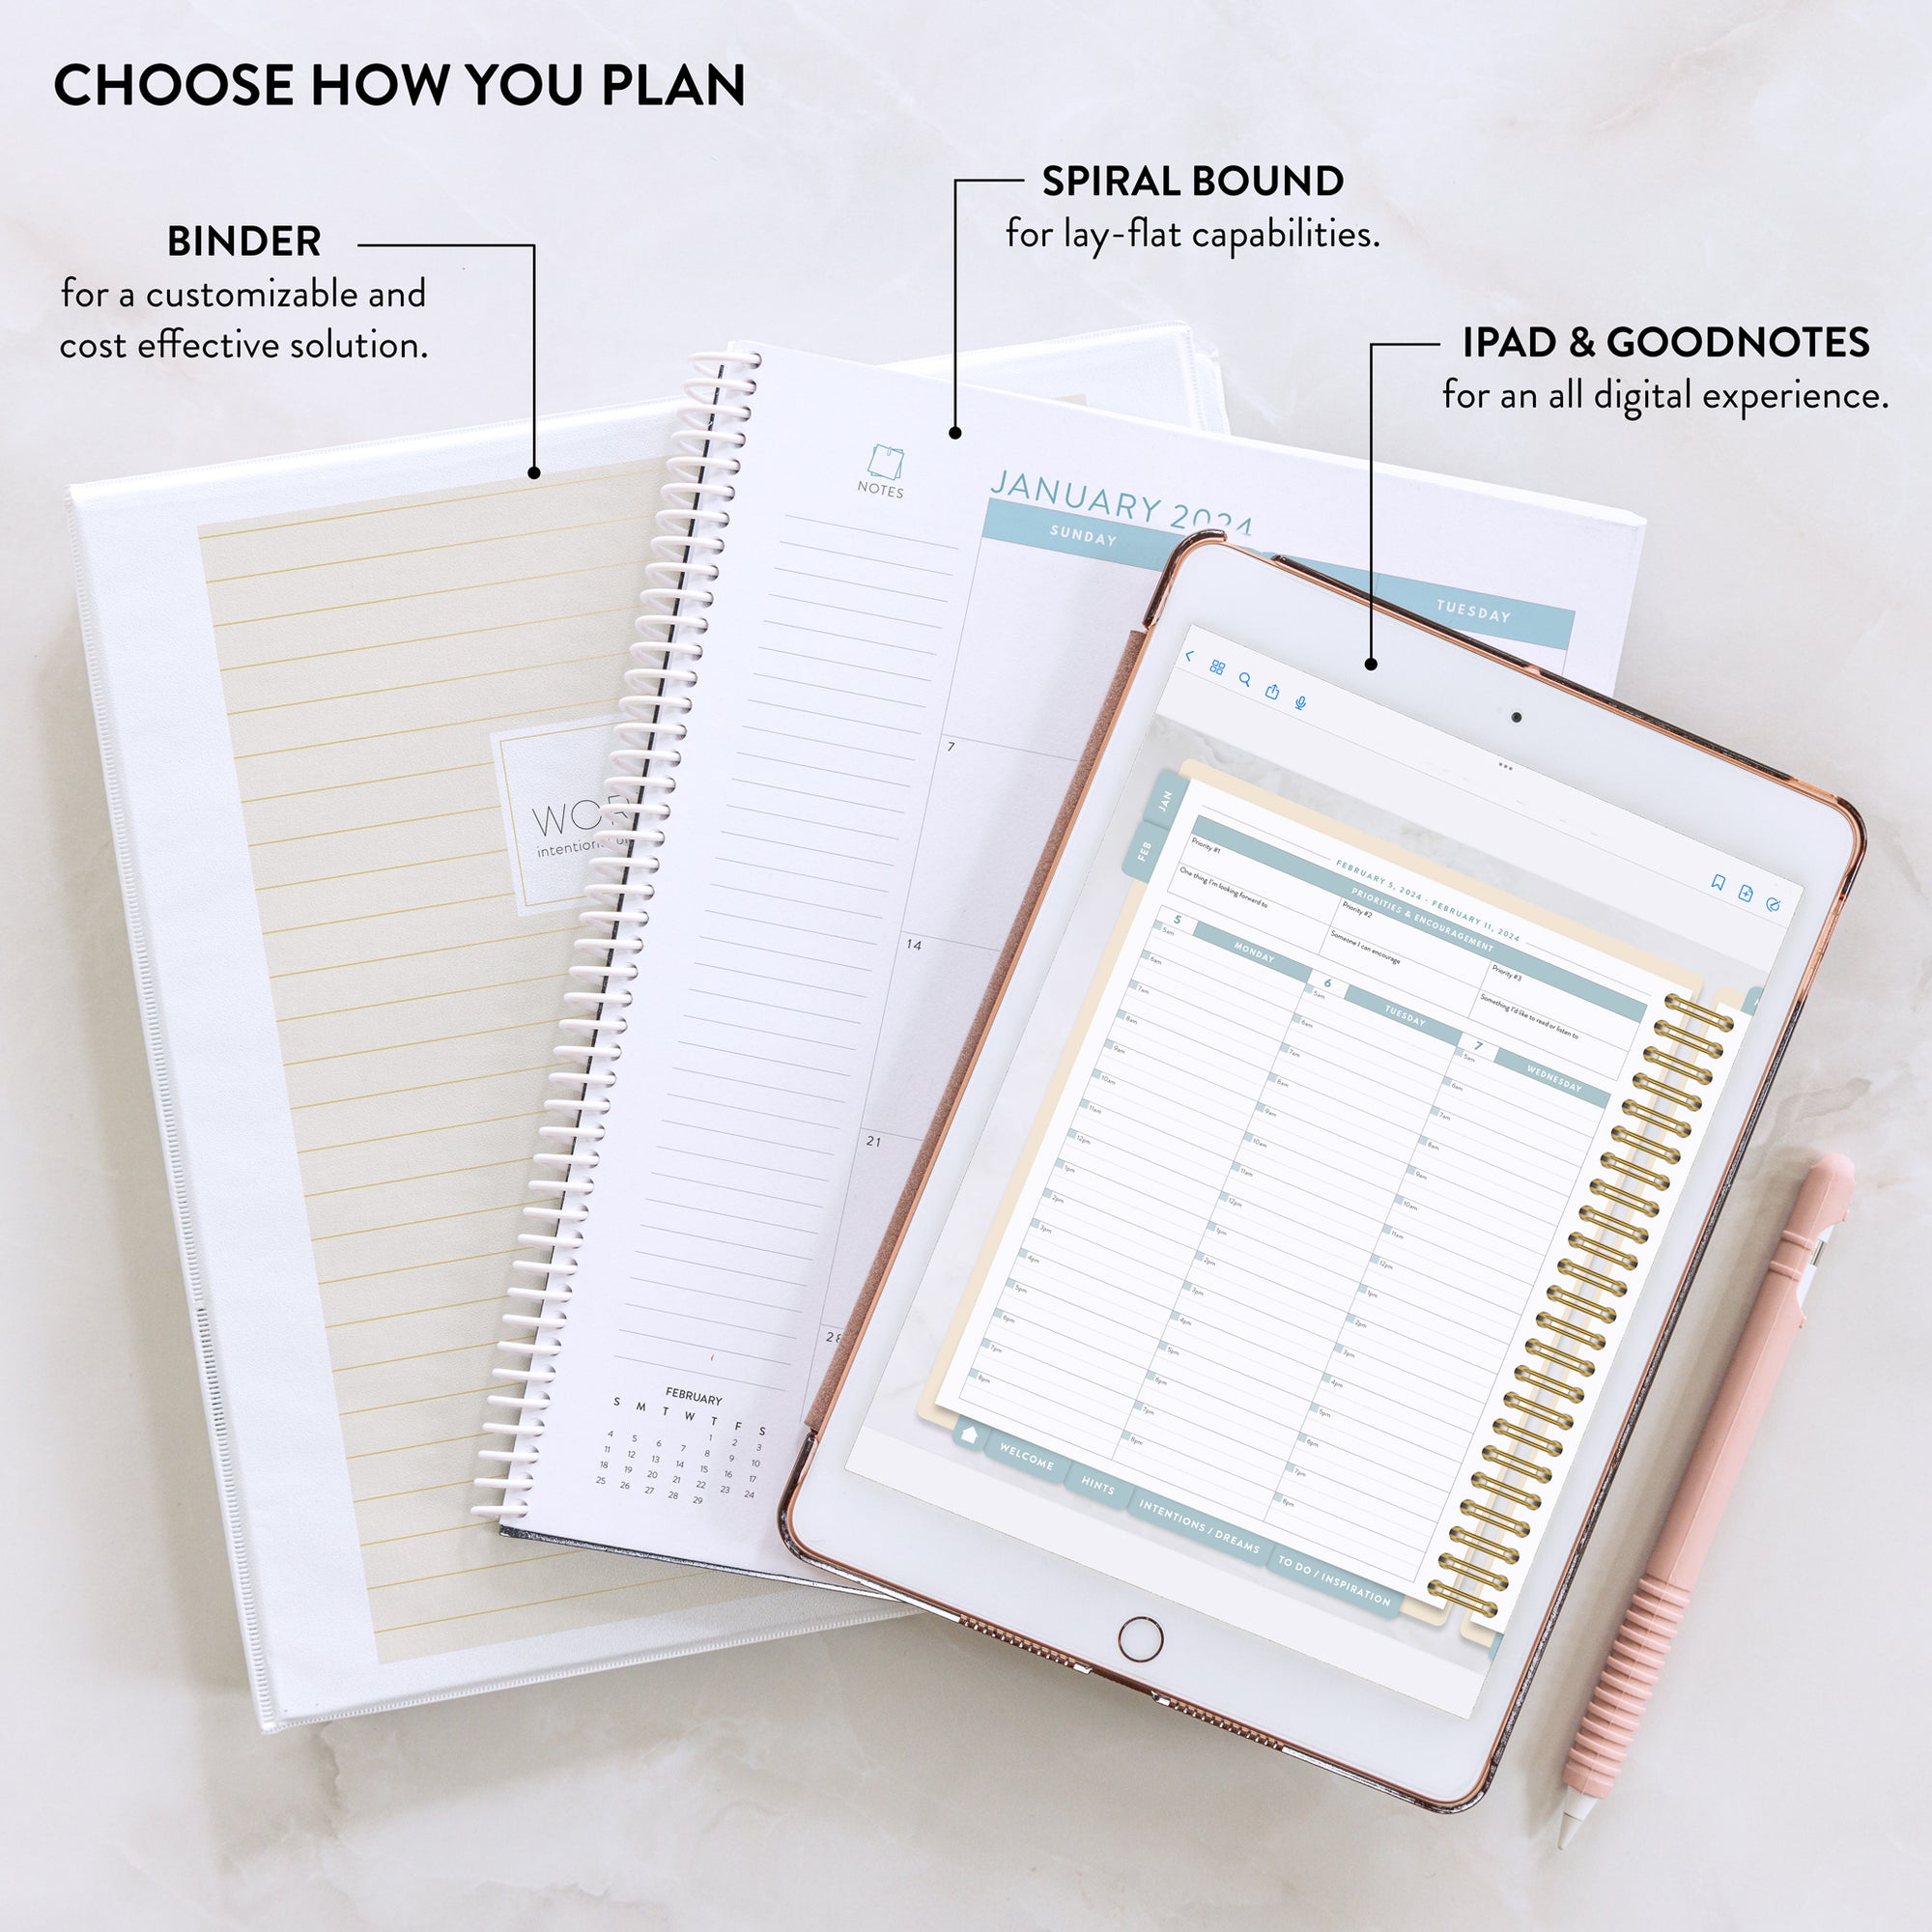 Work Planner downloaded to iPad and printed in spiral bound